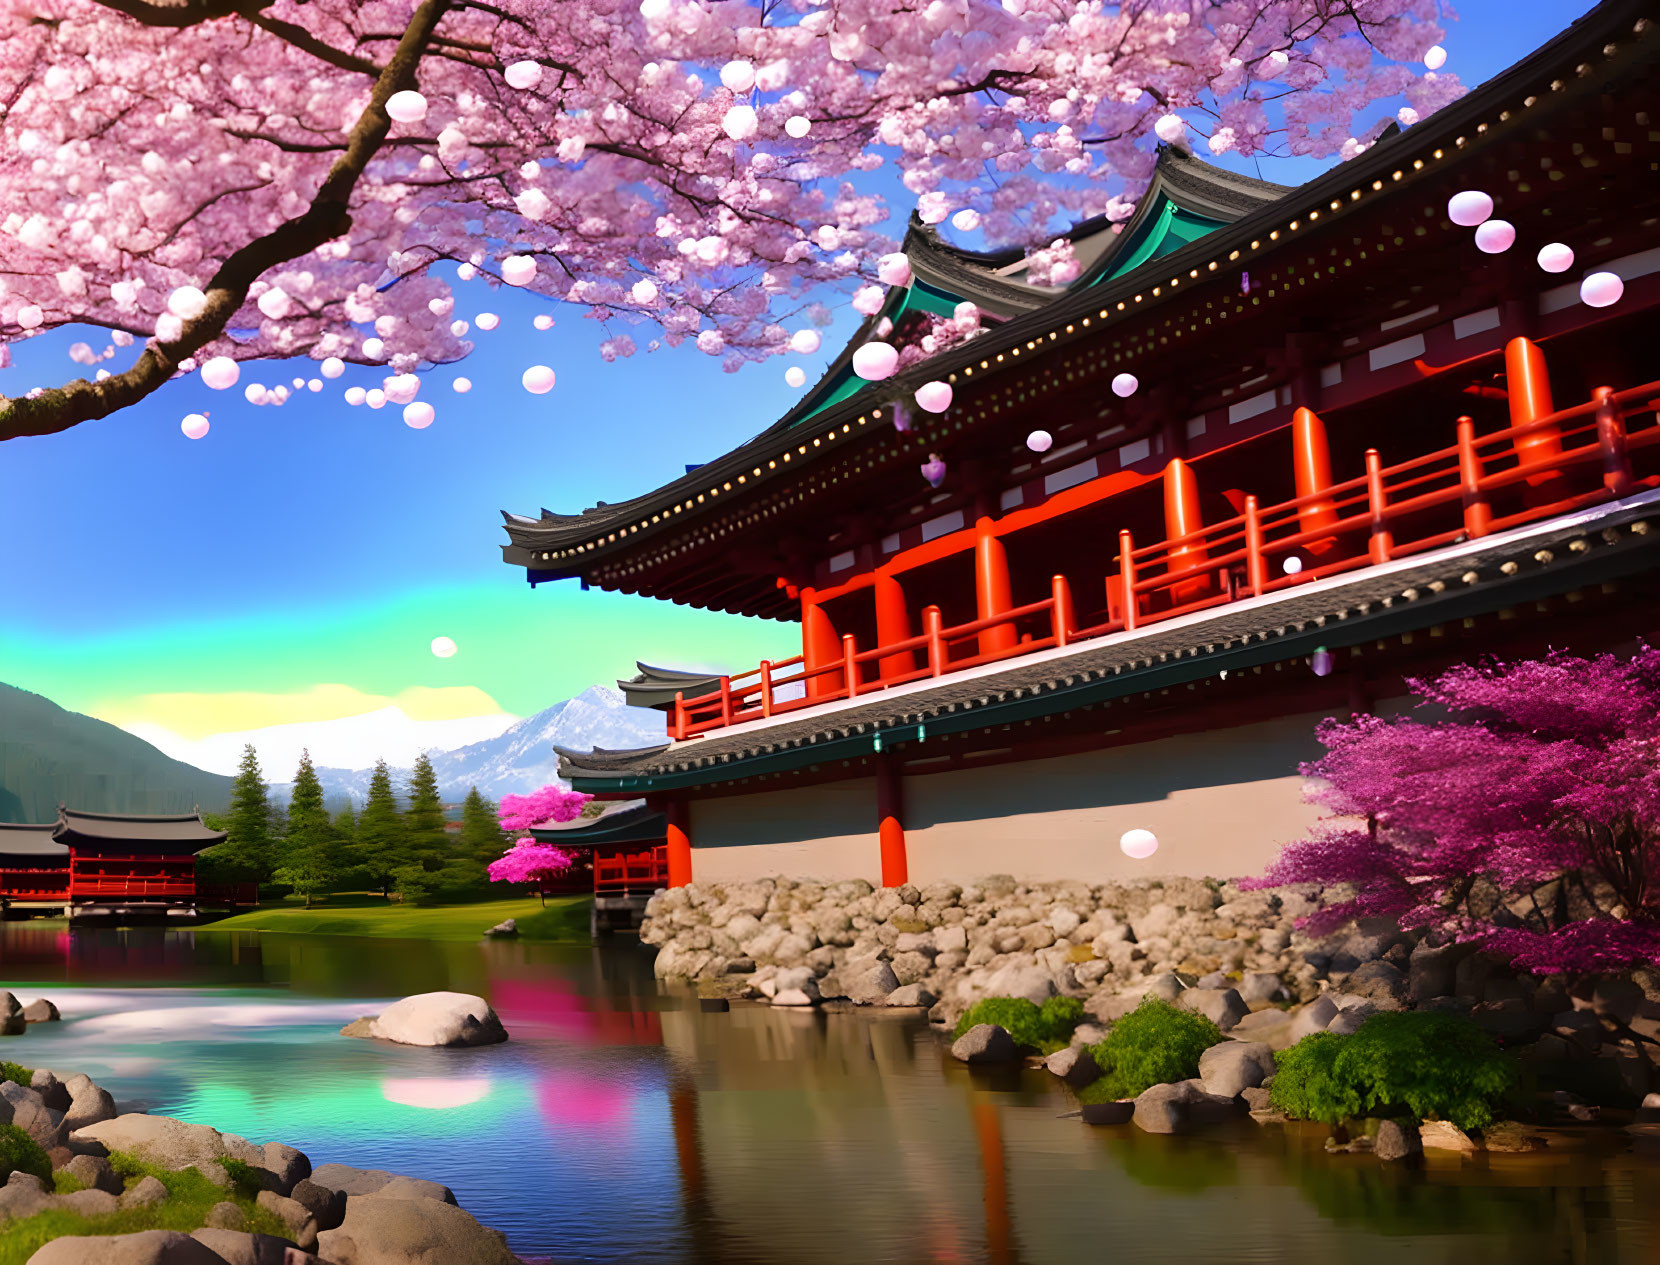 Japanese Architecture with Red Pillars Surrounded by Cherry Blossoms, Pond, Mountains, and Blue Sky